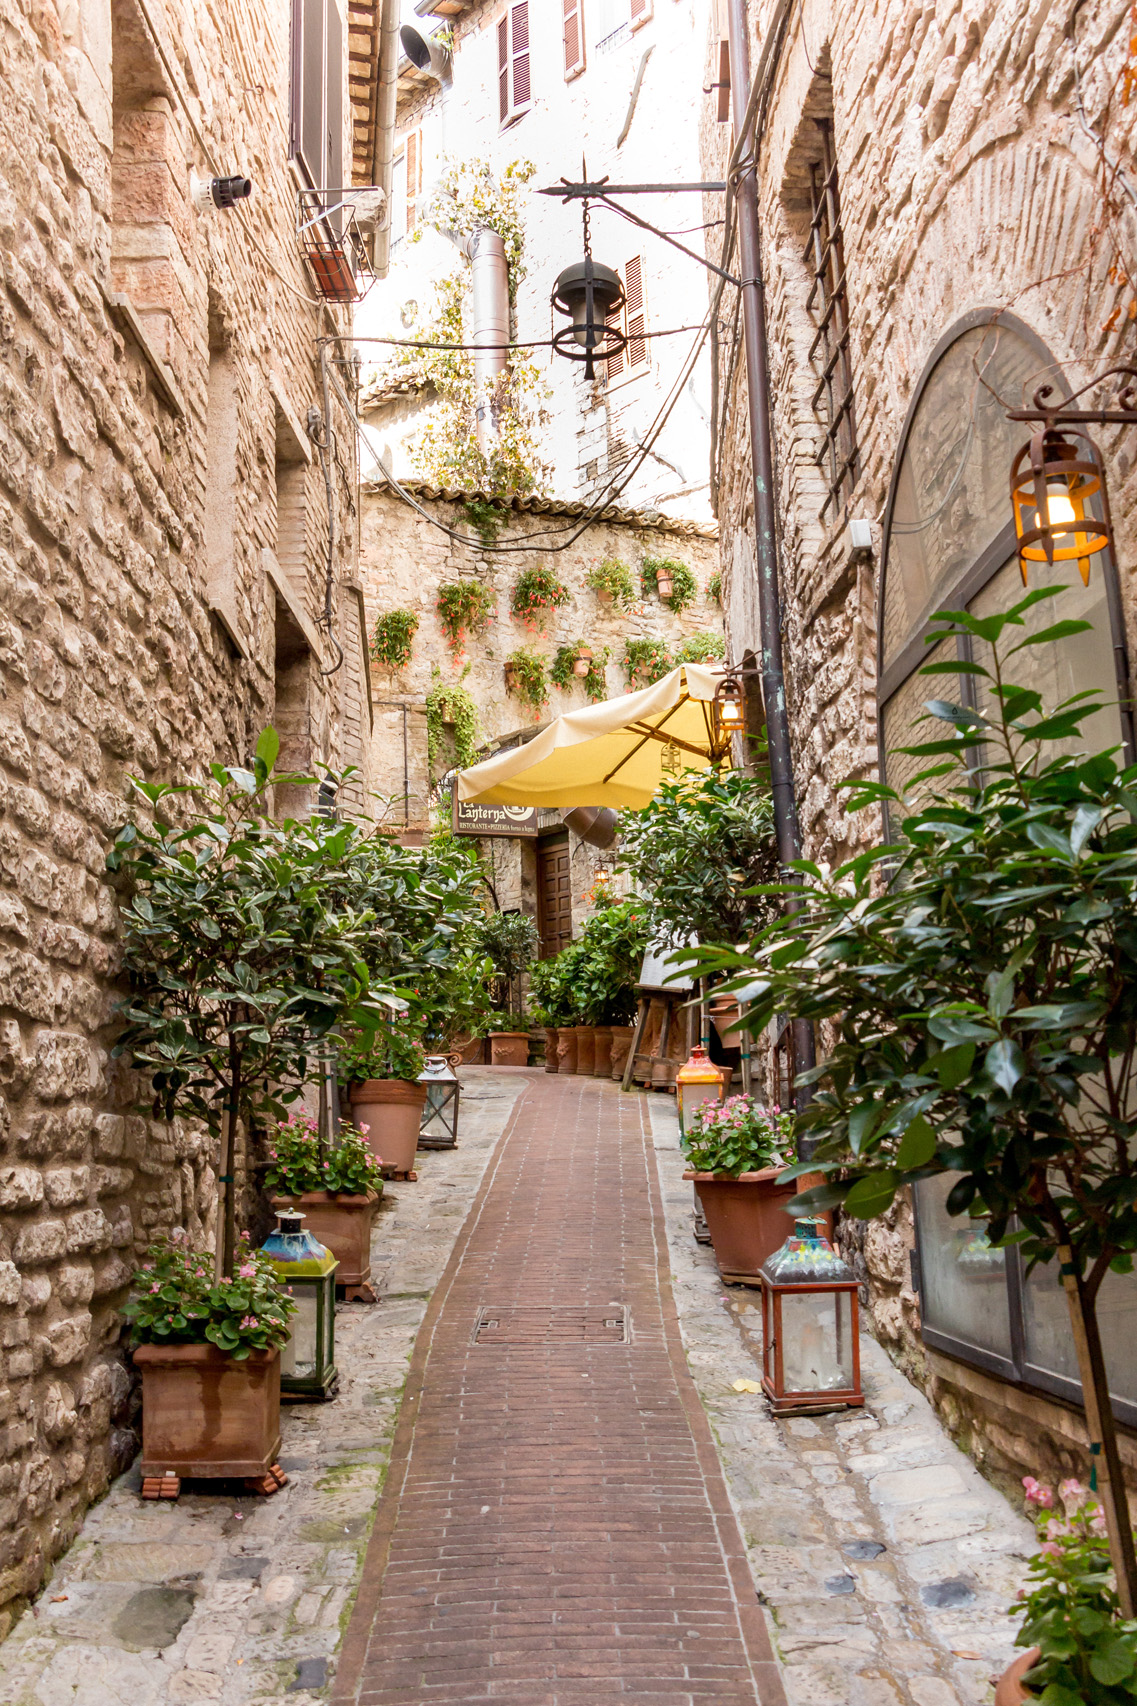 Flowery street in Assisi, Umbria